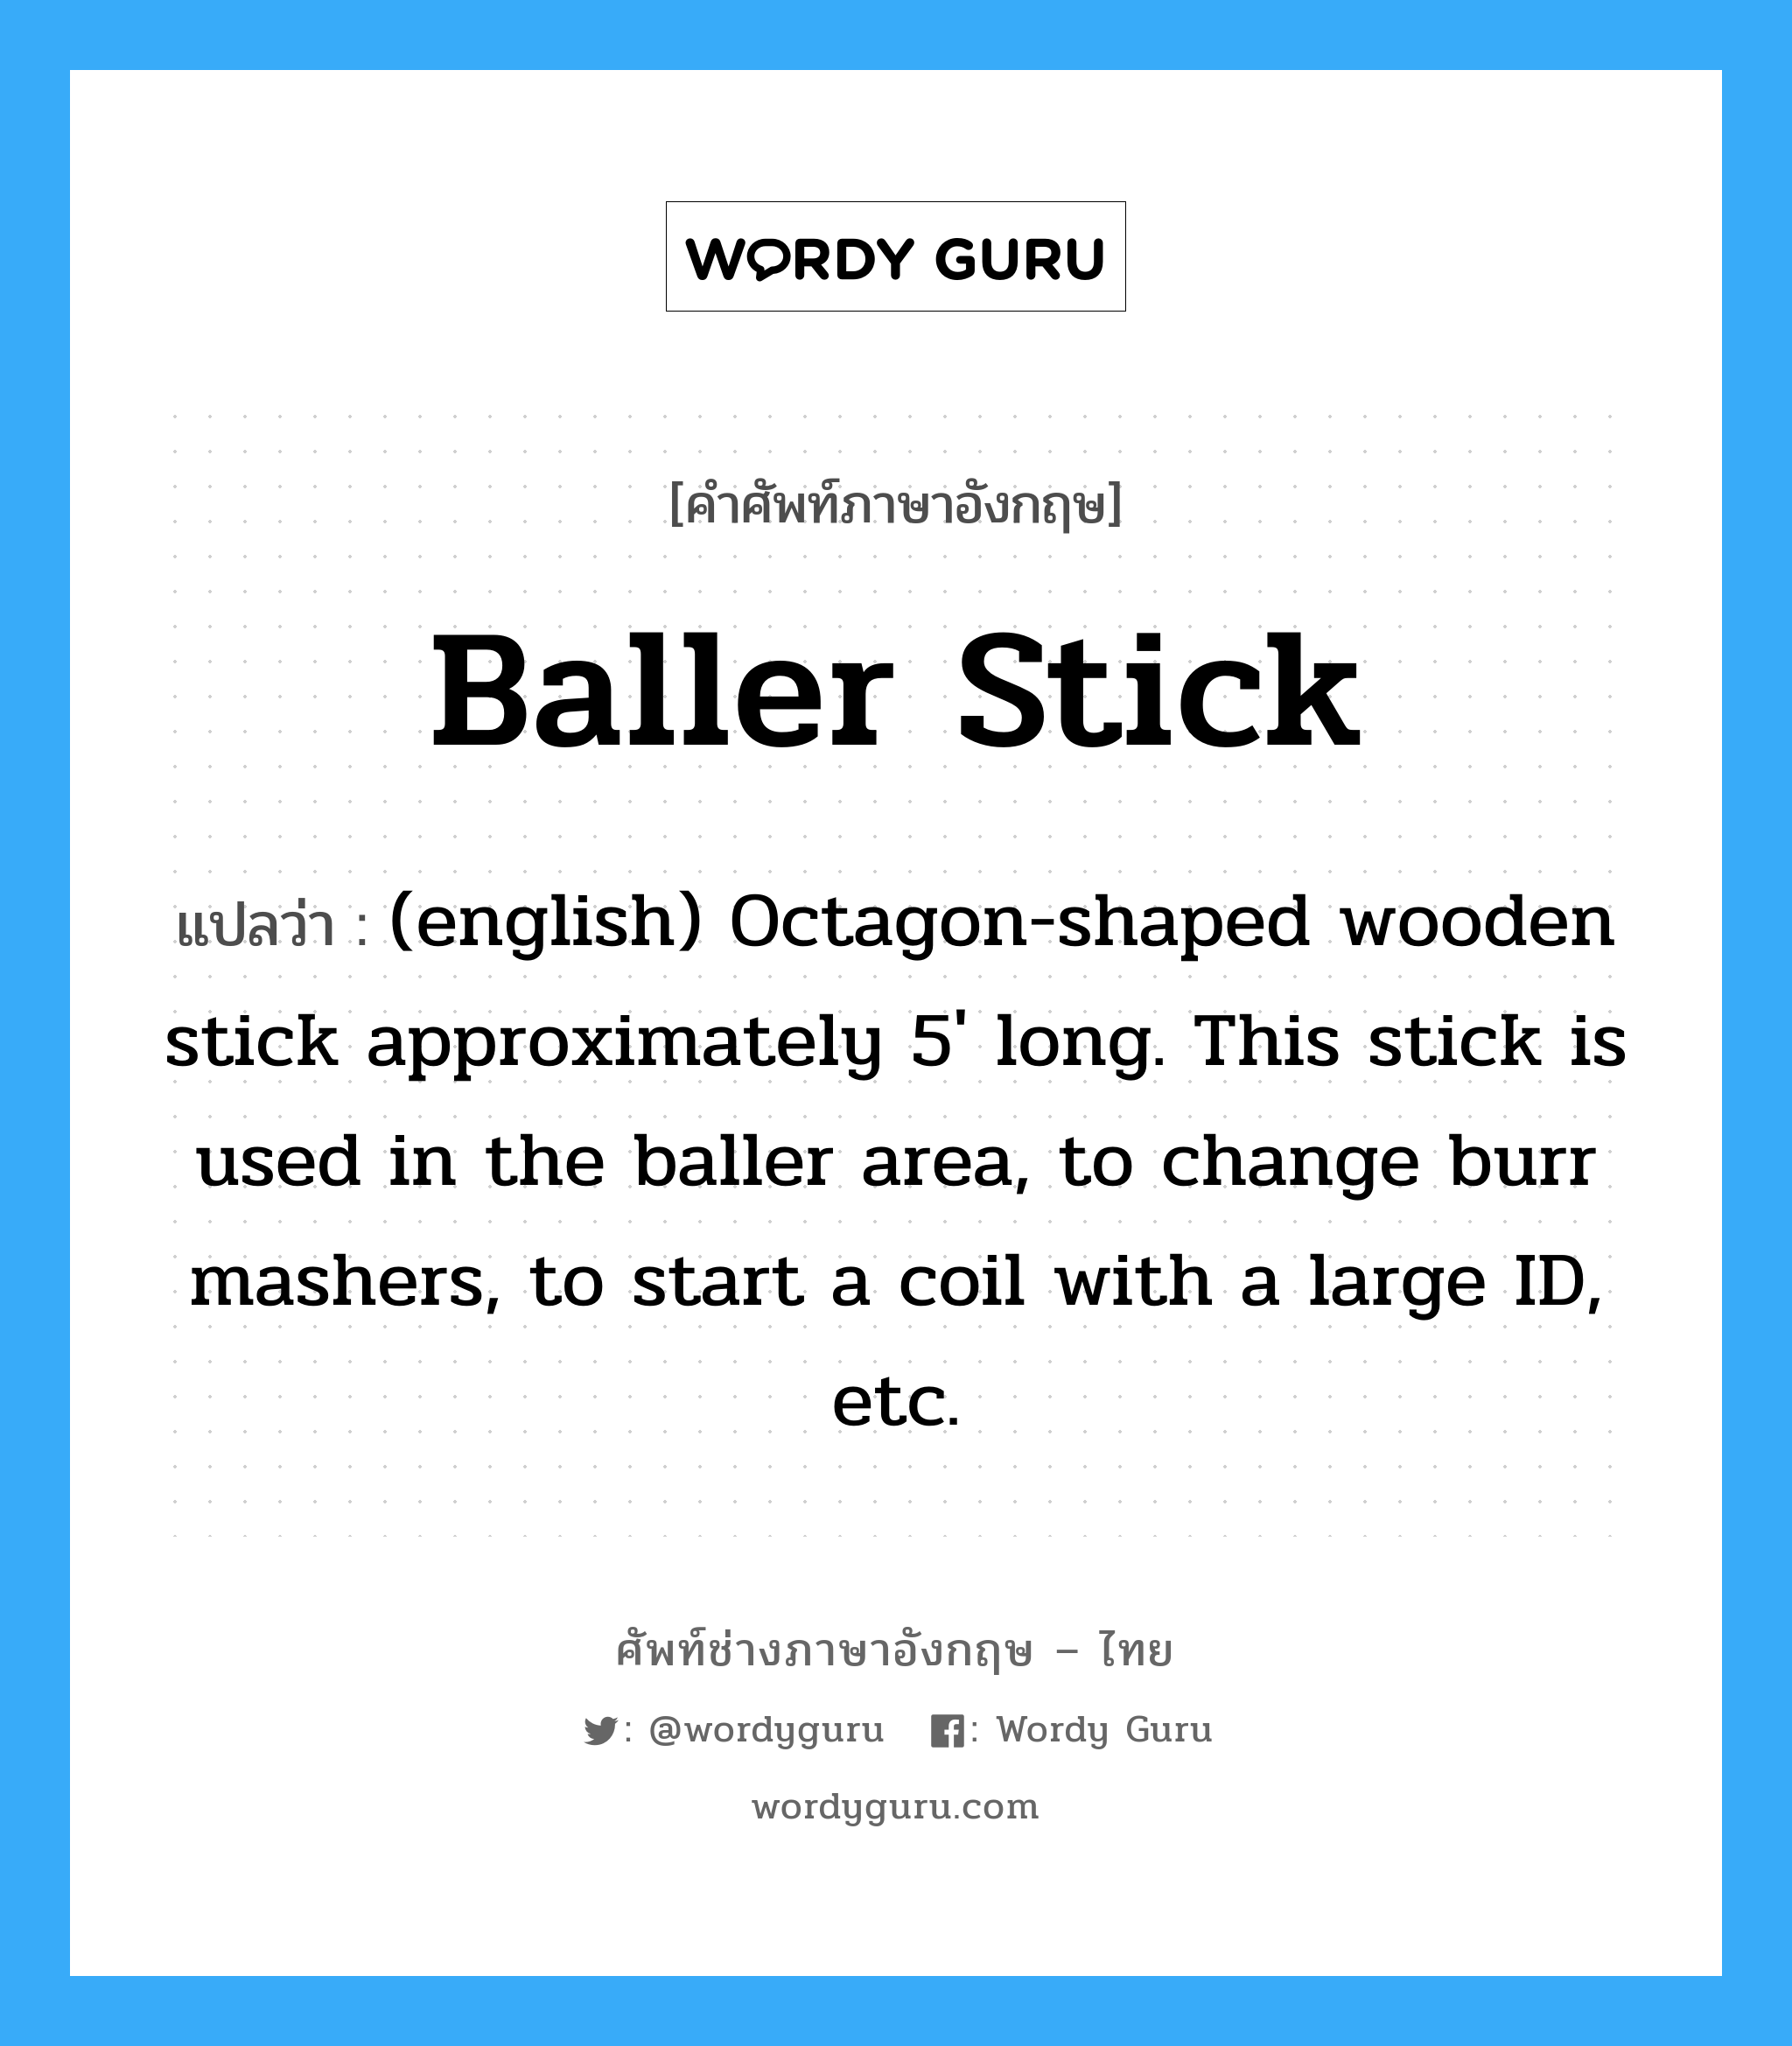 (english) Octagon-shaped wooden stick approximately 5' long. This stick is used in the baller area, to change burr mashers, to start a coil with a large ID, etc. ภาษาอังกฤษ?, คำศัพท์ช่างภาษาอังกฤษ - ไทย (english) Octagon-shaped wooden stick approximately 5' long. This stick is used in the baller area, to change burr mashers, to start a coil with a large ID, etc. คำศัพท์ภาษาอังกฤษ (english) Octagon-shaped wooden stick approximately 5' long. This stick is used in the baller area, to change burr mashers, to start a coil with a large ID, etc. แปลว่า Baller Stick